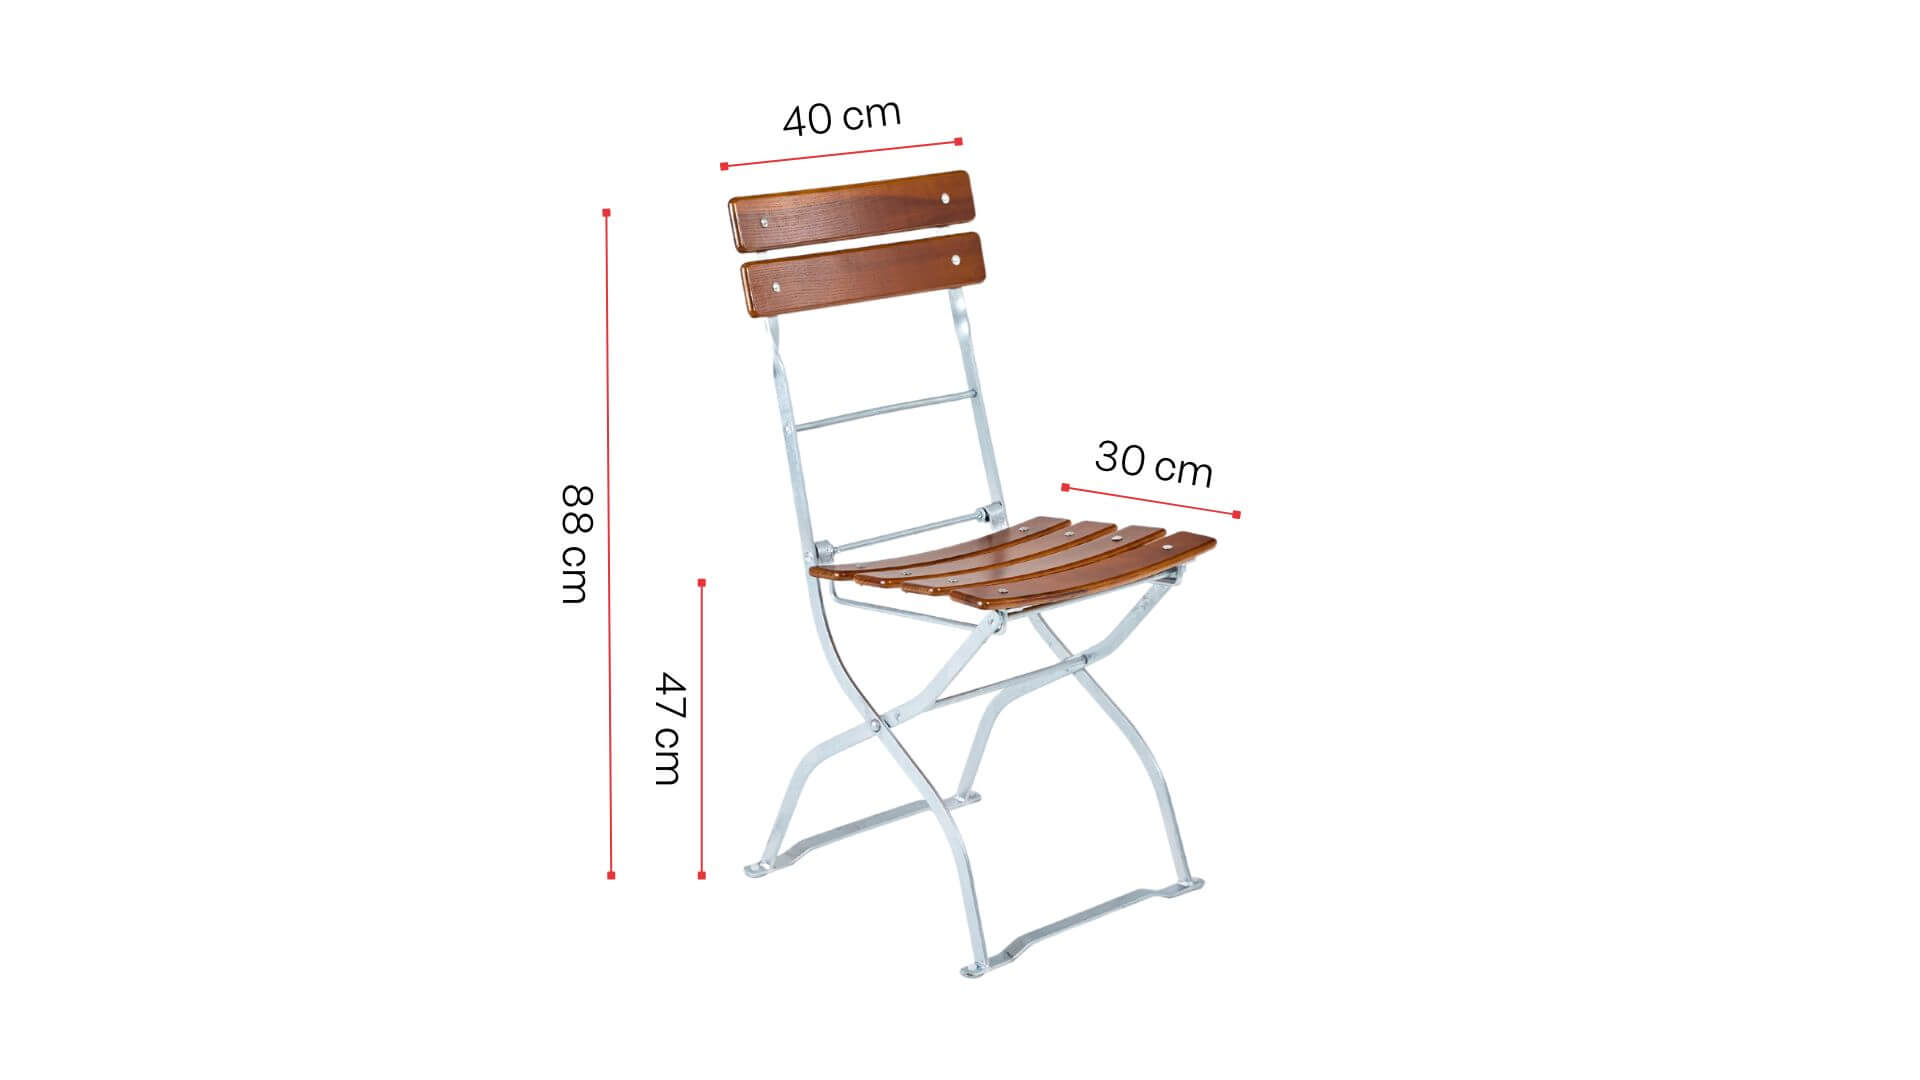 Dimensions of the beer garden chair are shown.